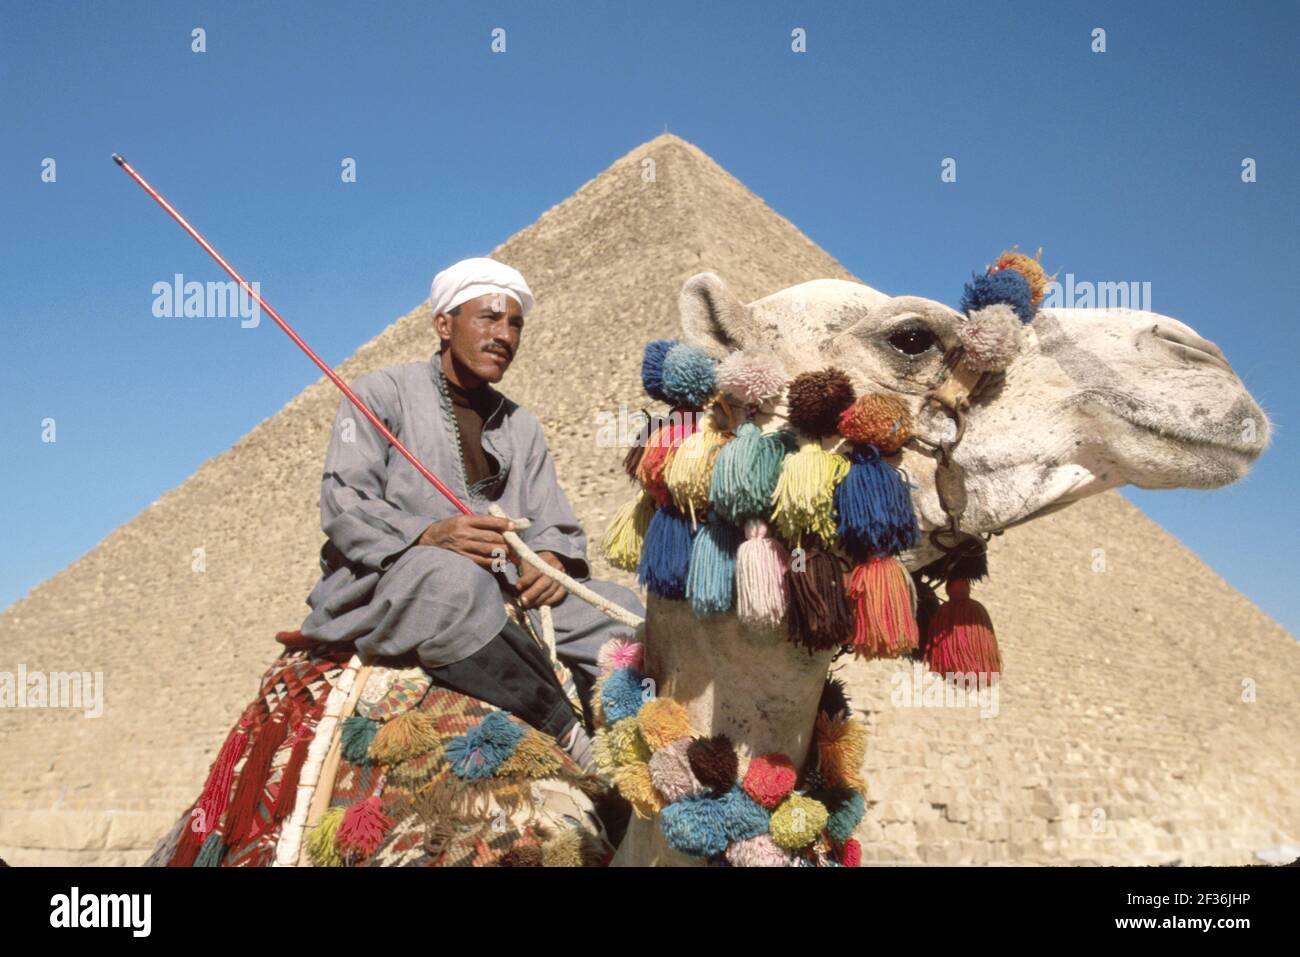 Cairo Egypt Egyptian Giza District Great Pyramid of Kheops,built 2600 B.C. BC Seven Wonders of World,Muslim man camel rider offering rides, Stock Photo